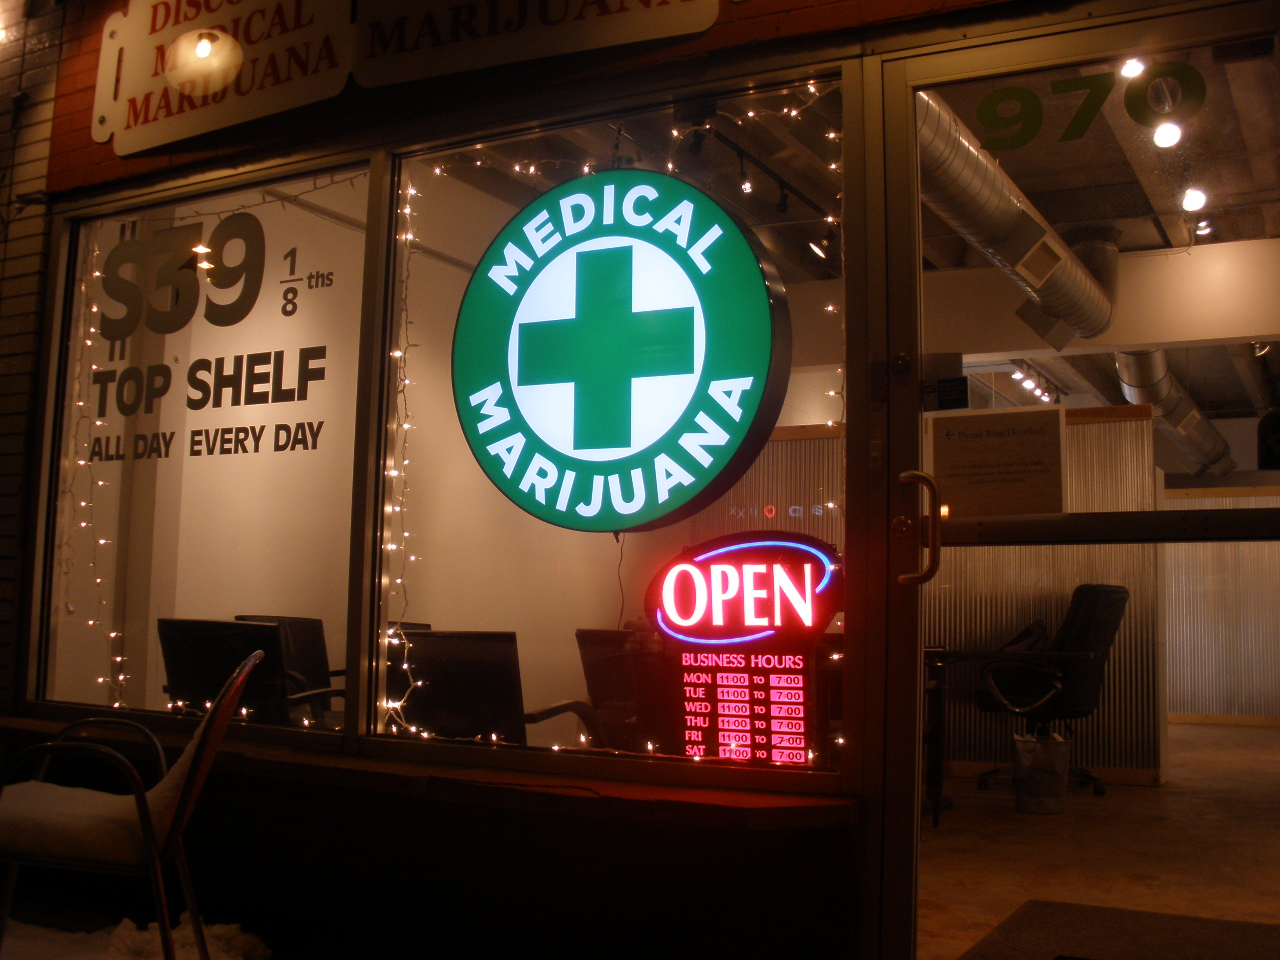 Image: Medical marijuana is expected to rise globally, paving the way for new small businesses